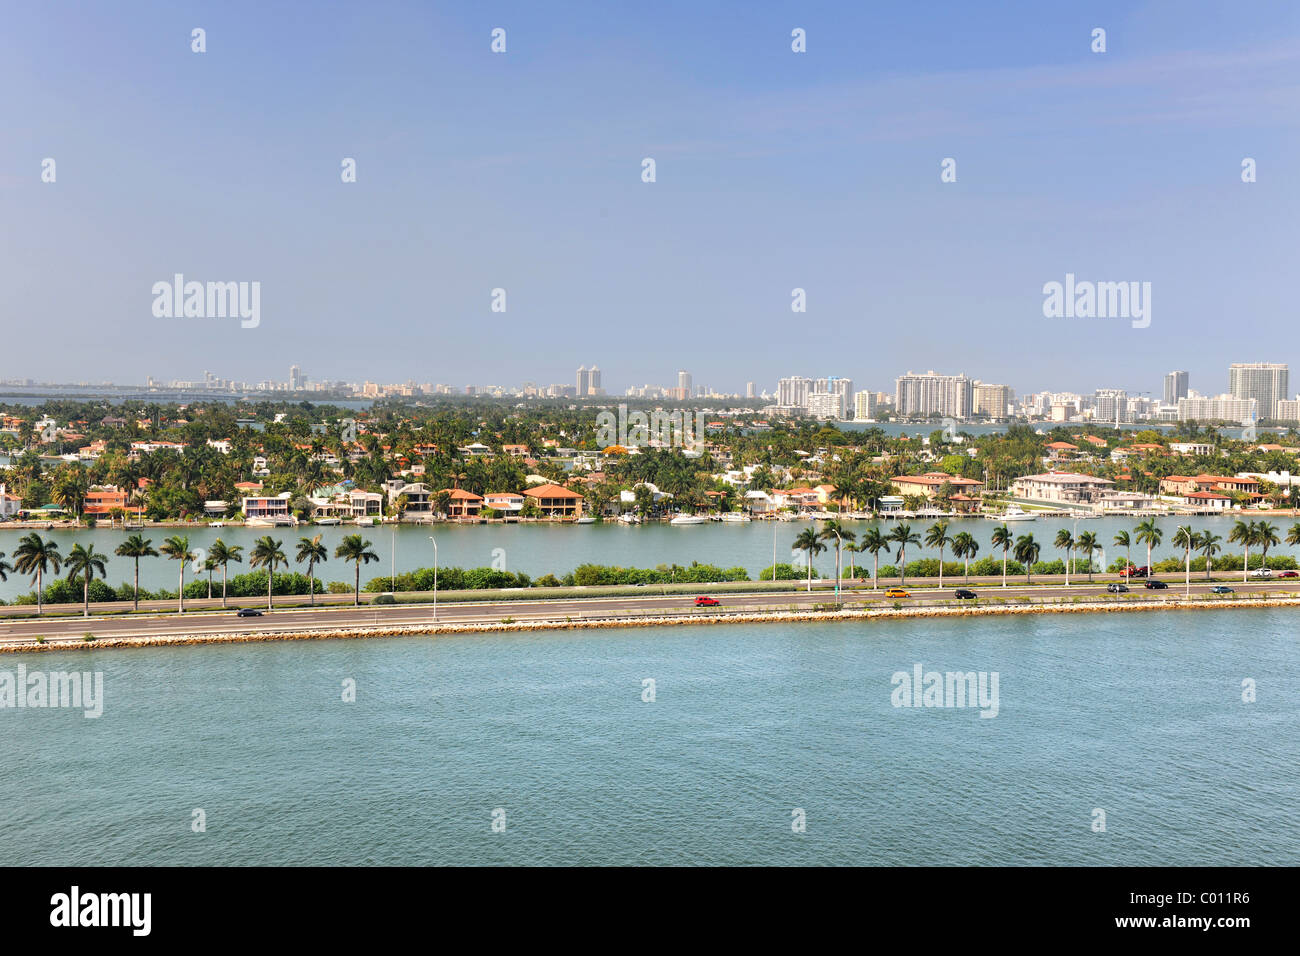 Aerial view of Miami with Star Island in foreground Stock Photo